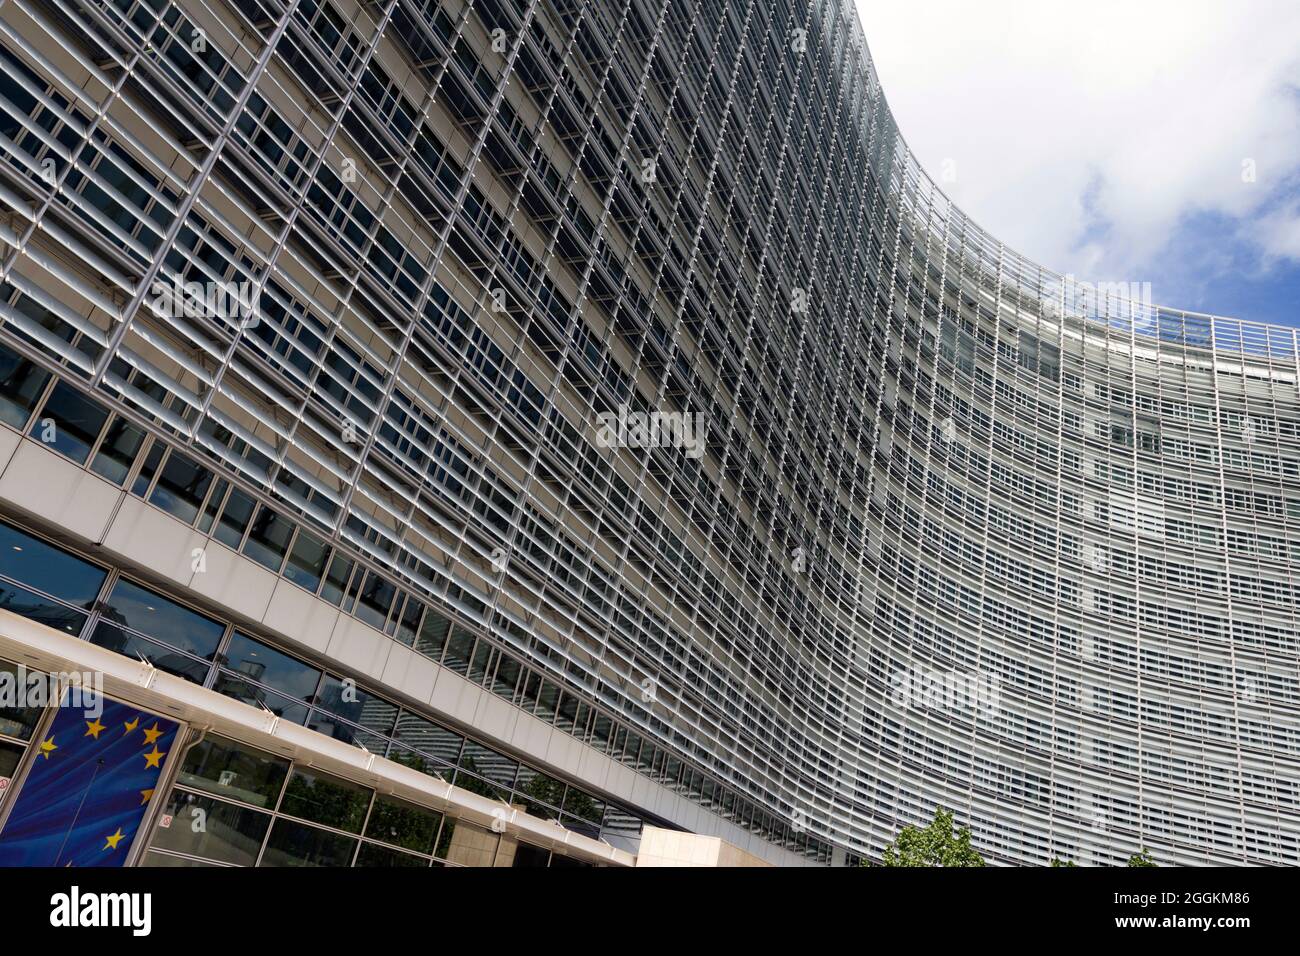 The Berlaymont Building, seat of the European Commission in Brussels, Belgium Stock Photo